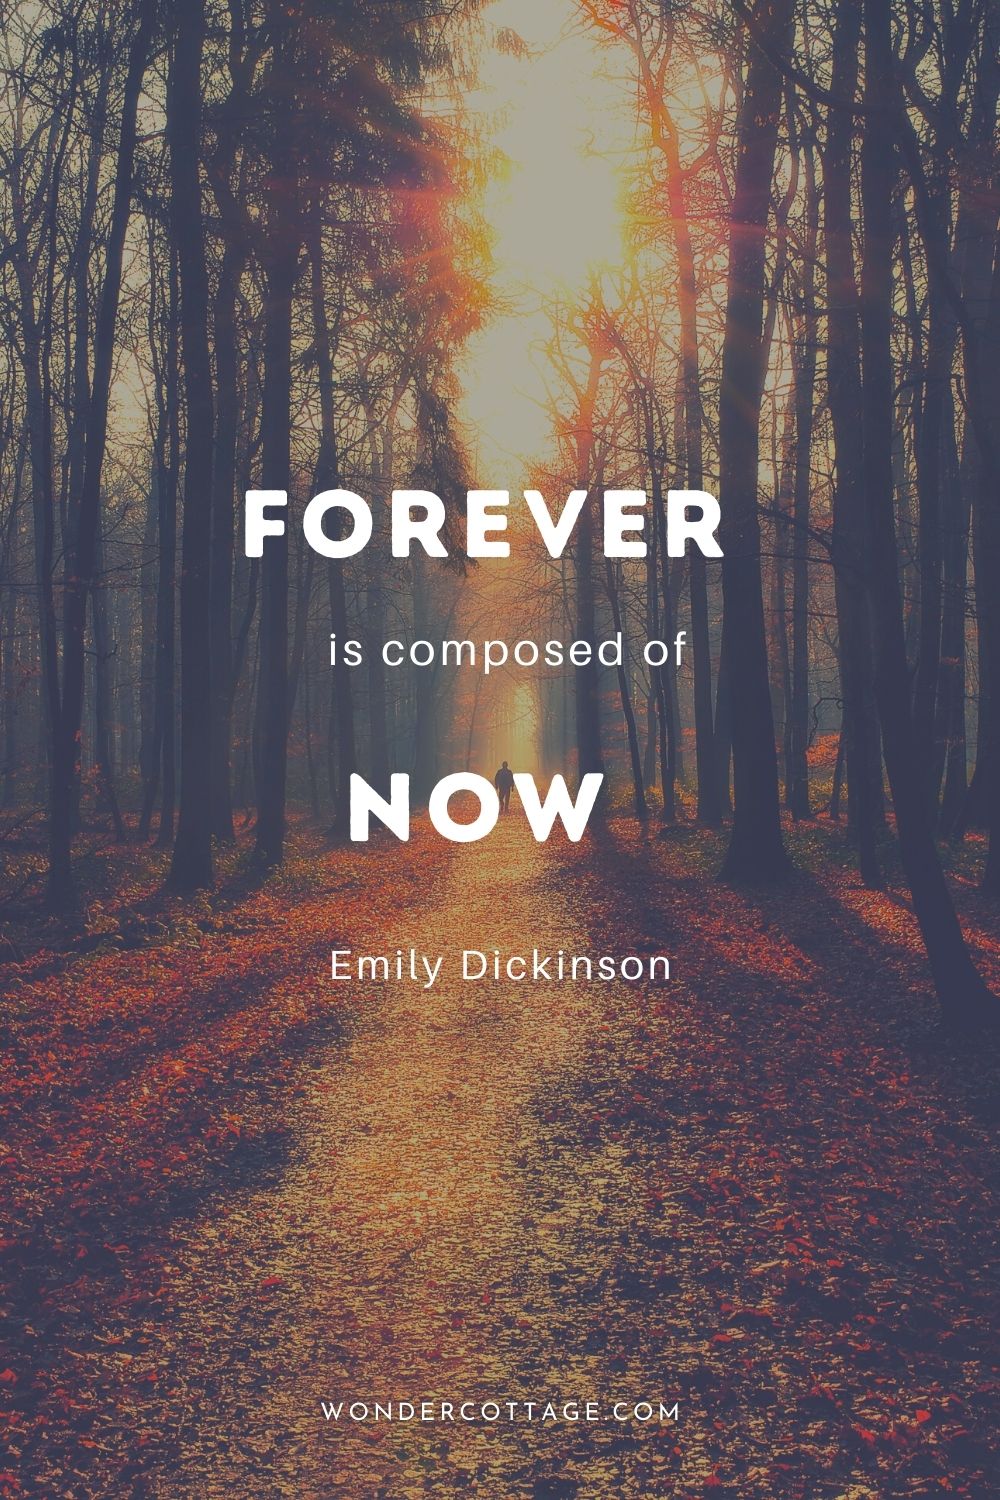 Forever is composed of now. Emily Dickinson